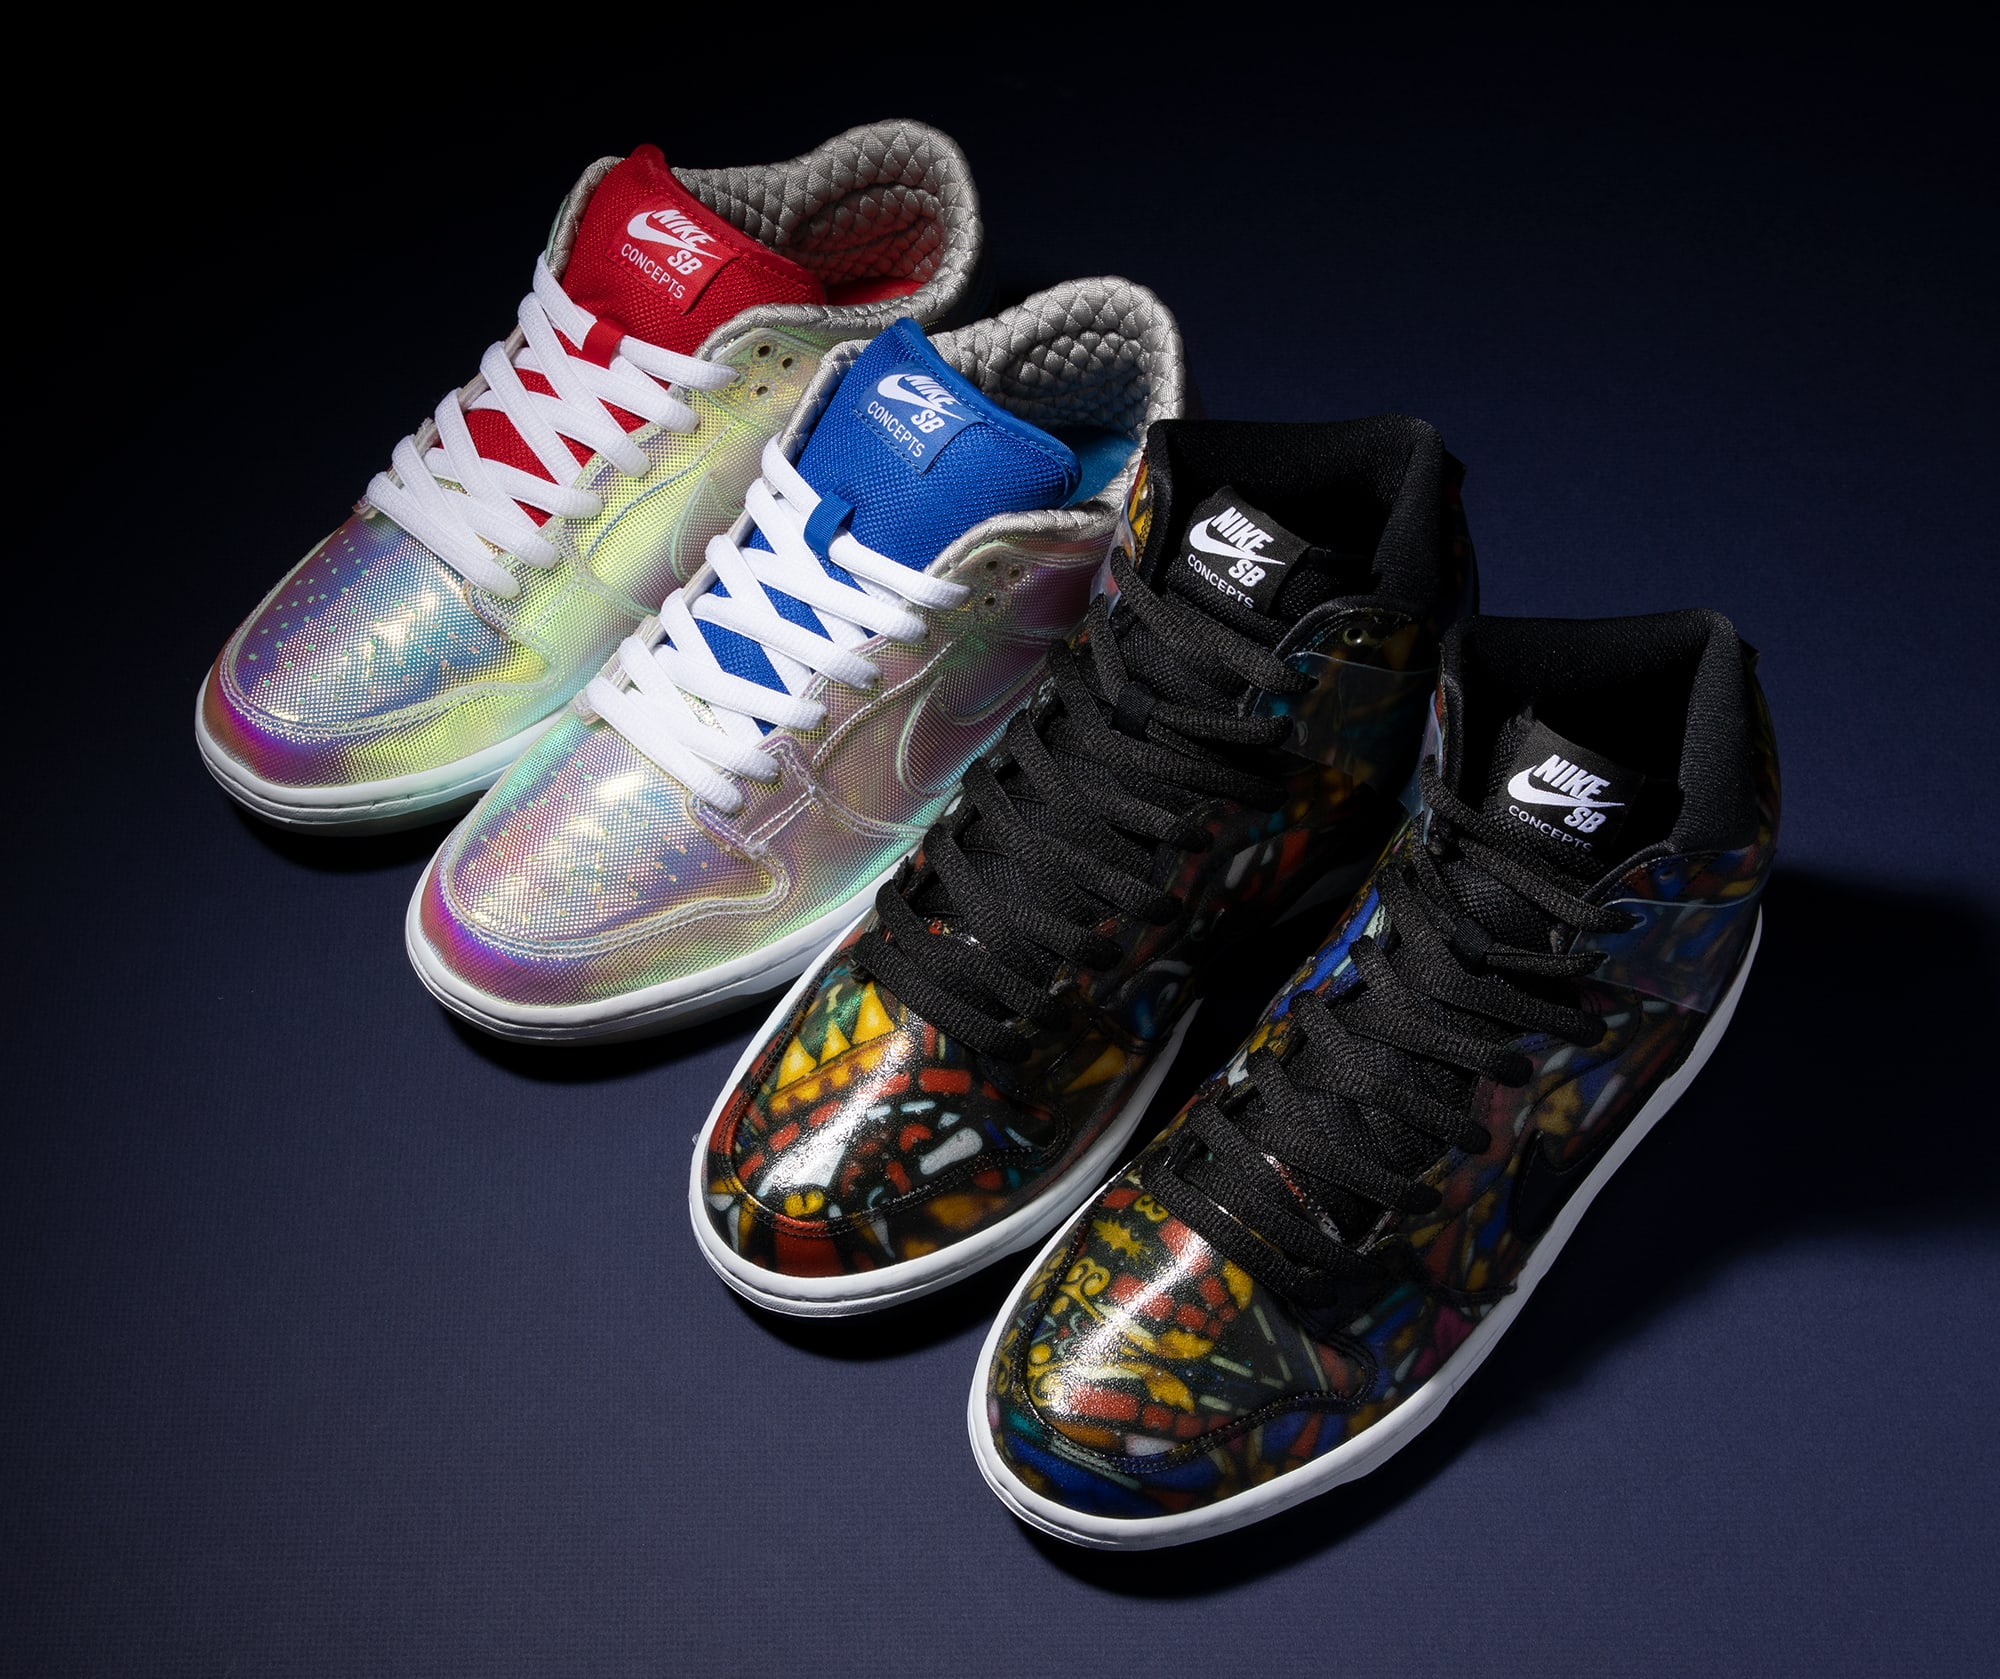 Concepts x Nike SB Dunk Low &#x27;Holy Grail&#x27; SB Dunk High &#x27;Stained Glass&#x27; Top